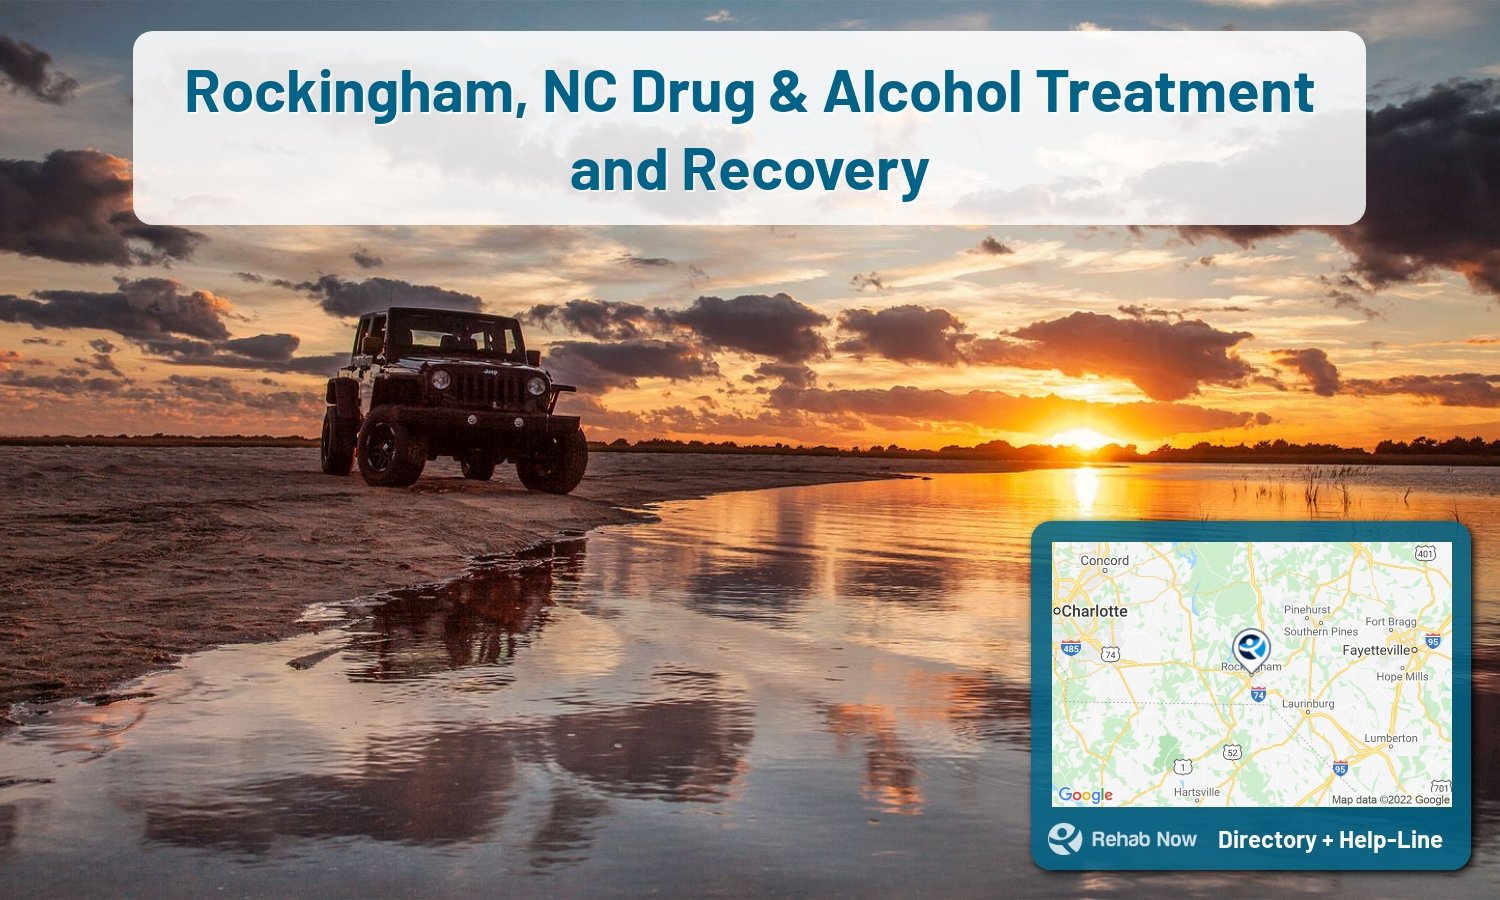 Rockingham, NC Treatment Centers. Find drug rehab in Rockingham, North Carolina, or detox and treatment programs. Get the right help now!